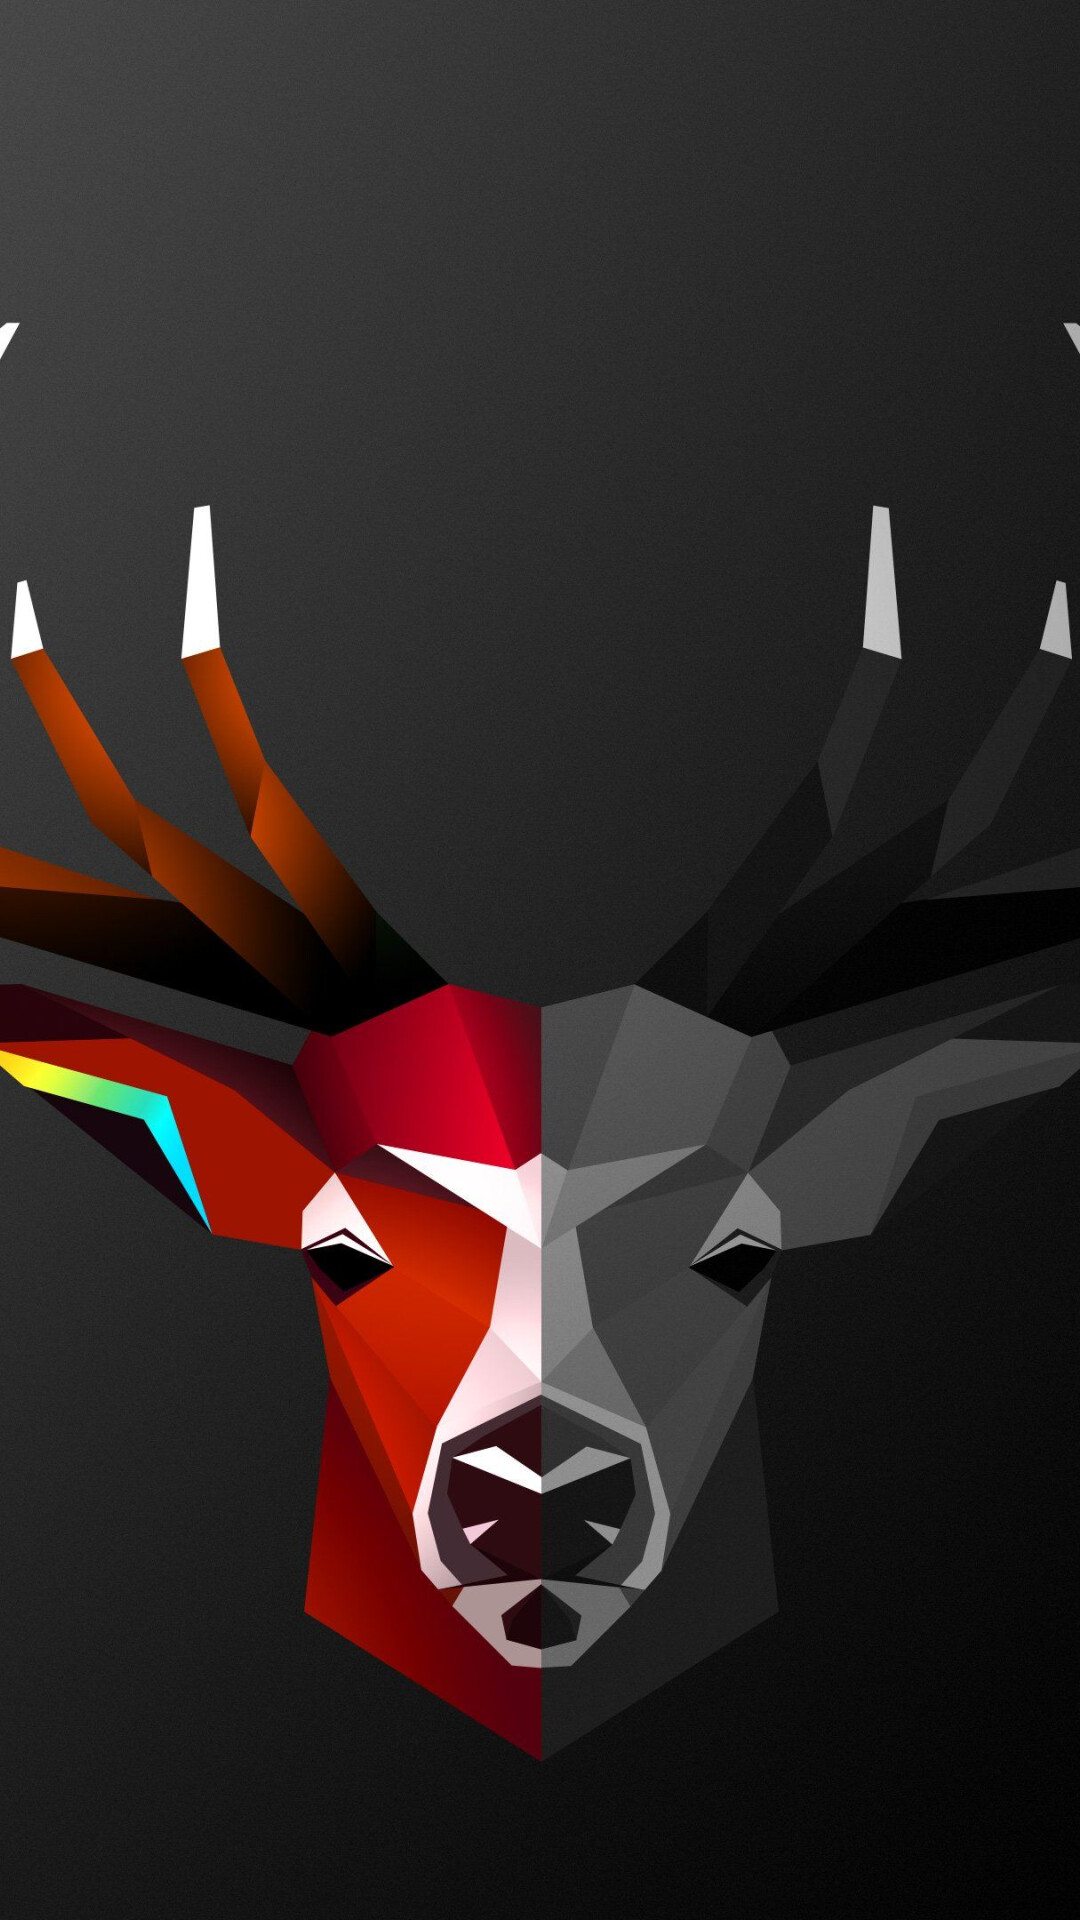 Geometric Animal: Deer head, The abstract one, The vibrant one, The colorful one. 1080x1920 Full HD Wallpaper.